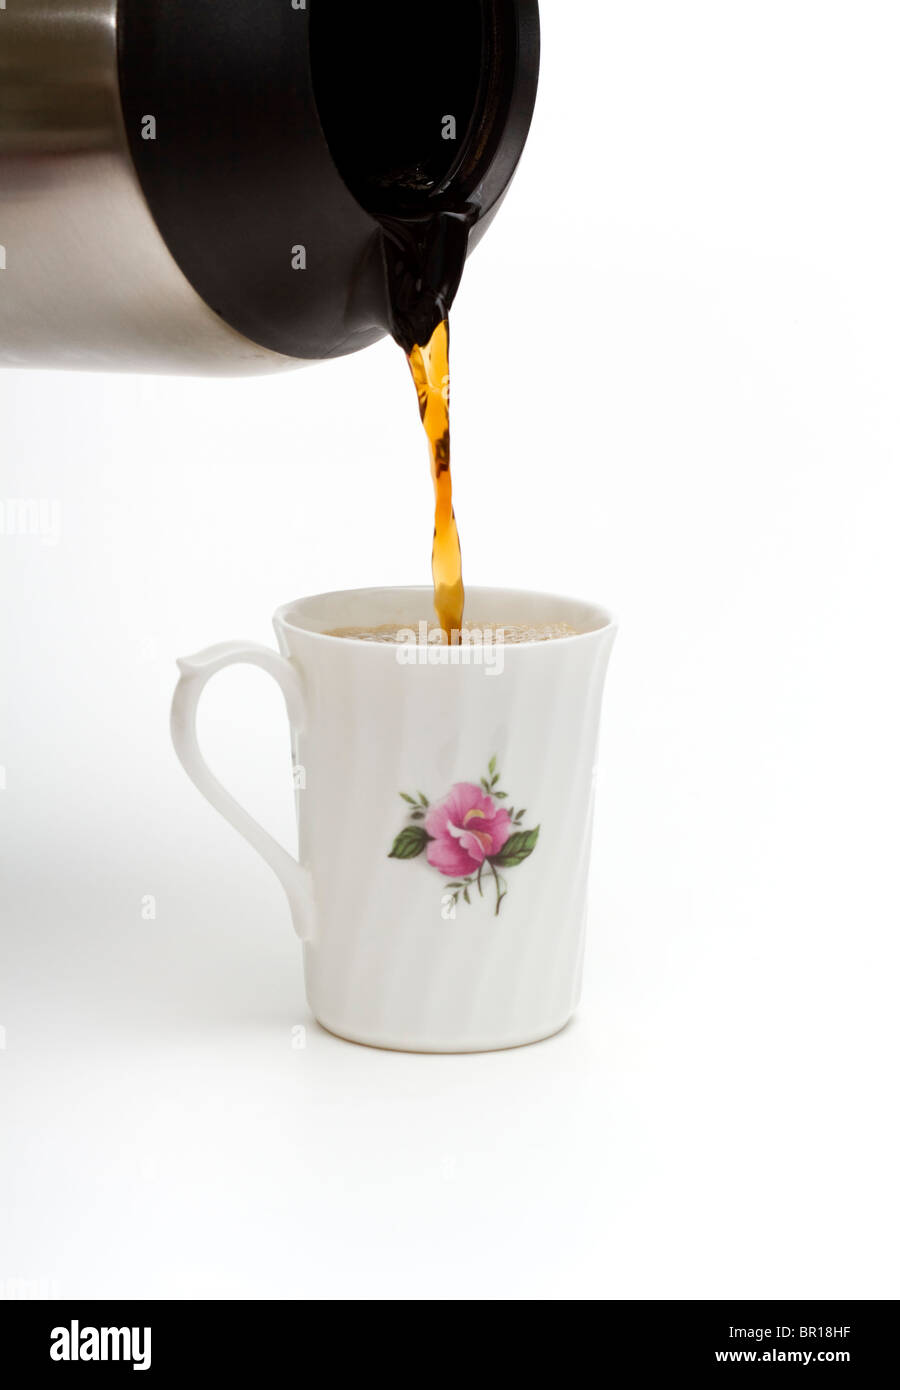 Pouring hot coffee into a china mug from a thermal carafe Stock Photo